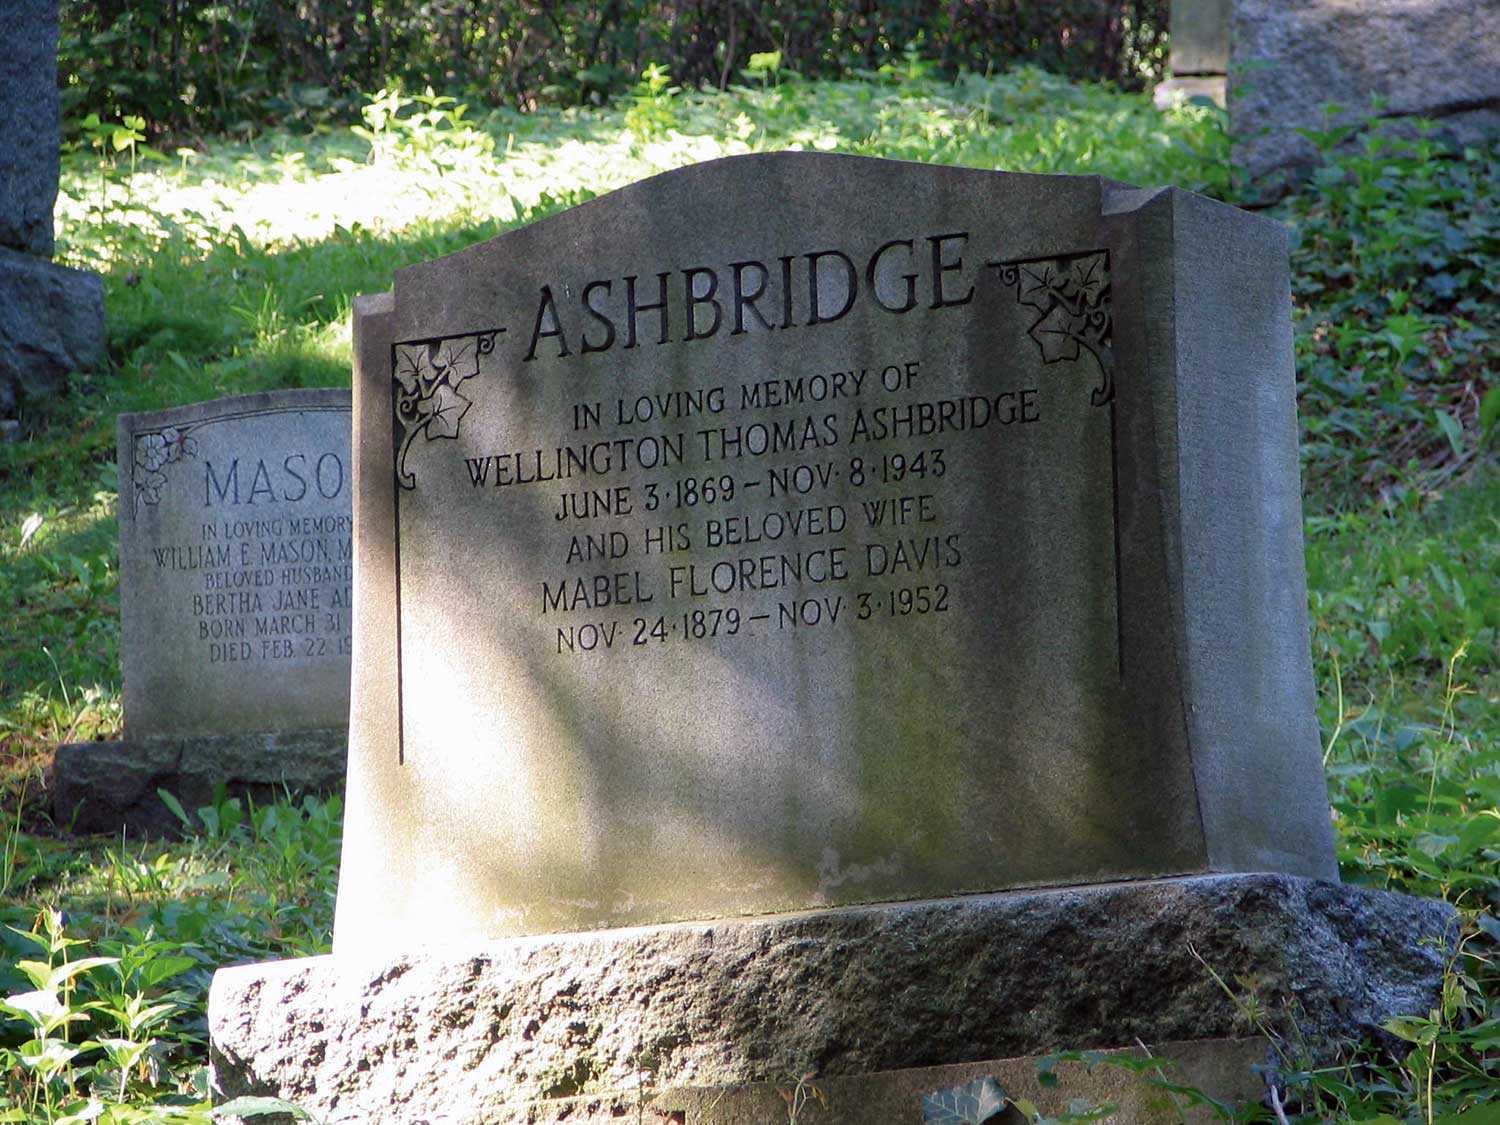 Wellington and Mabel Ashbridge are buried, along with other members of the Ashbridge family, in the Toronto Necropolis.